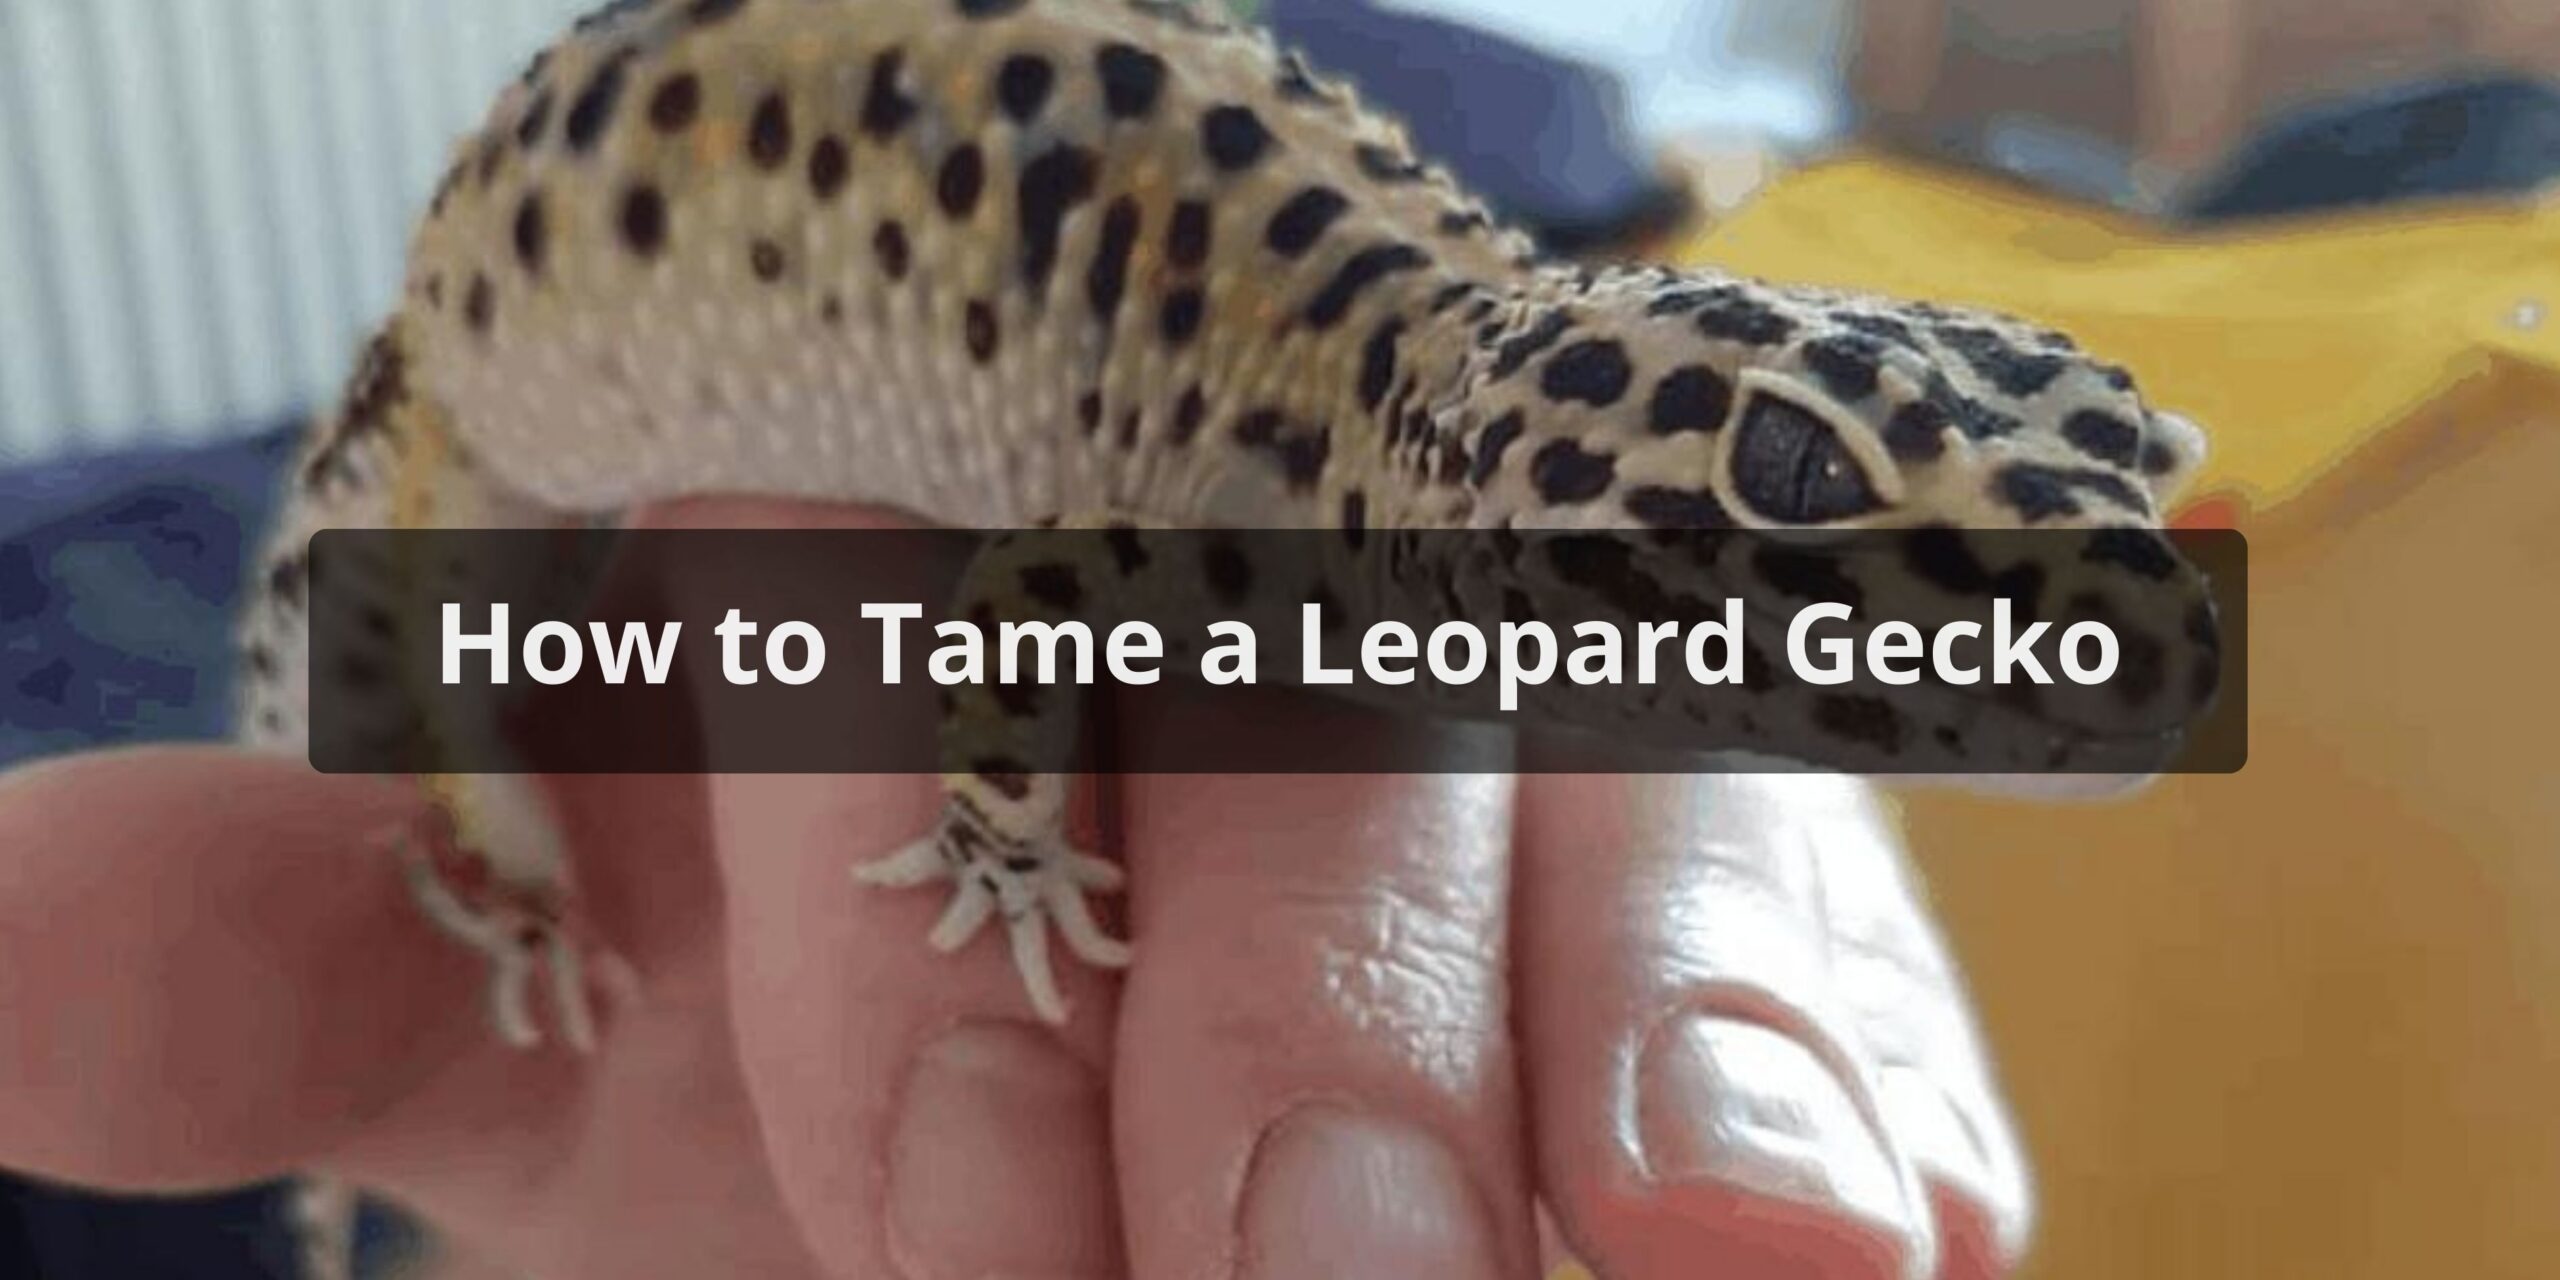 How to Tame a Leopard Gecko